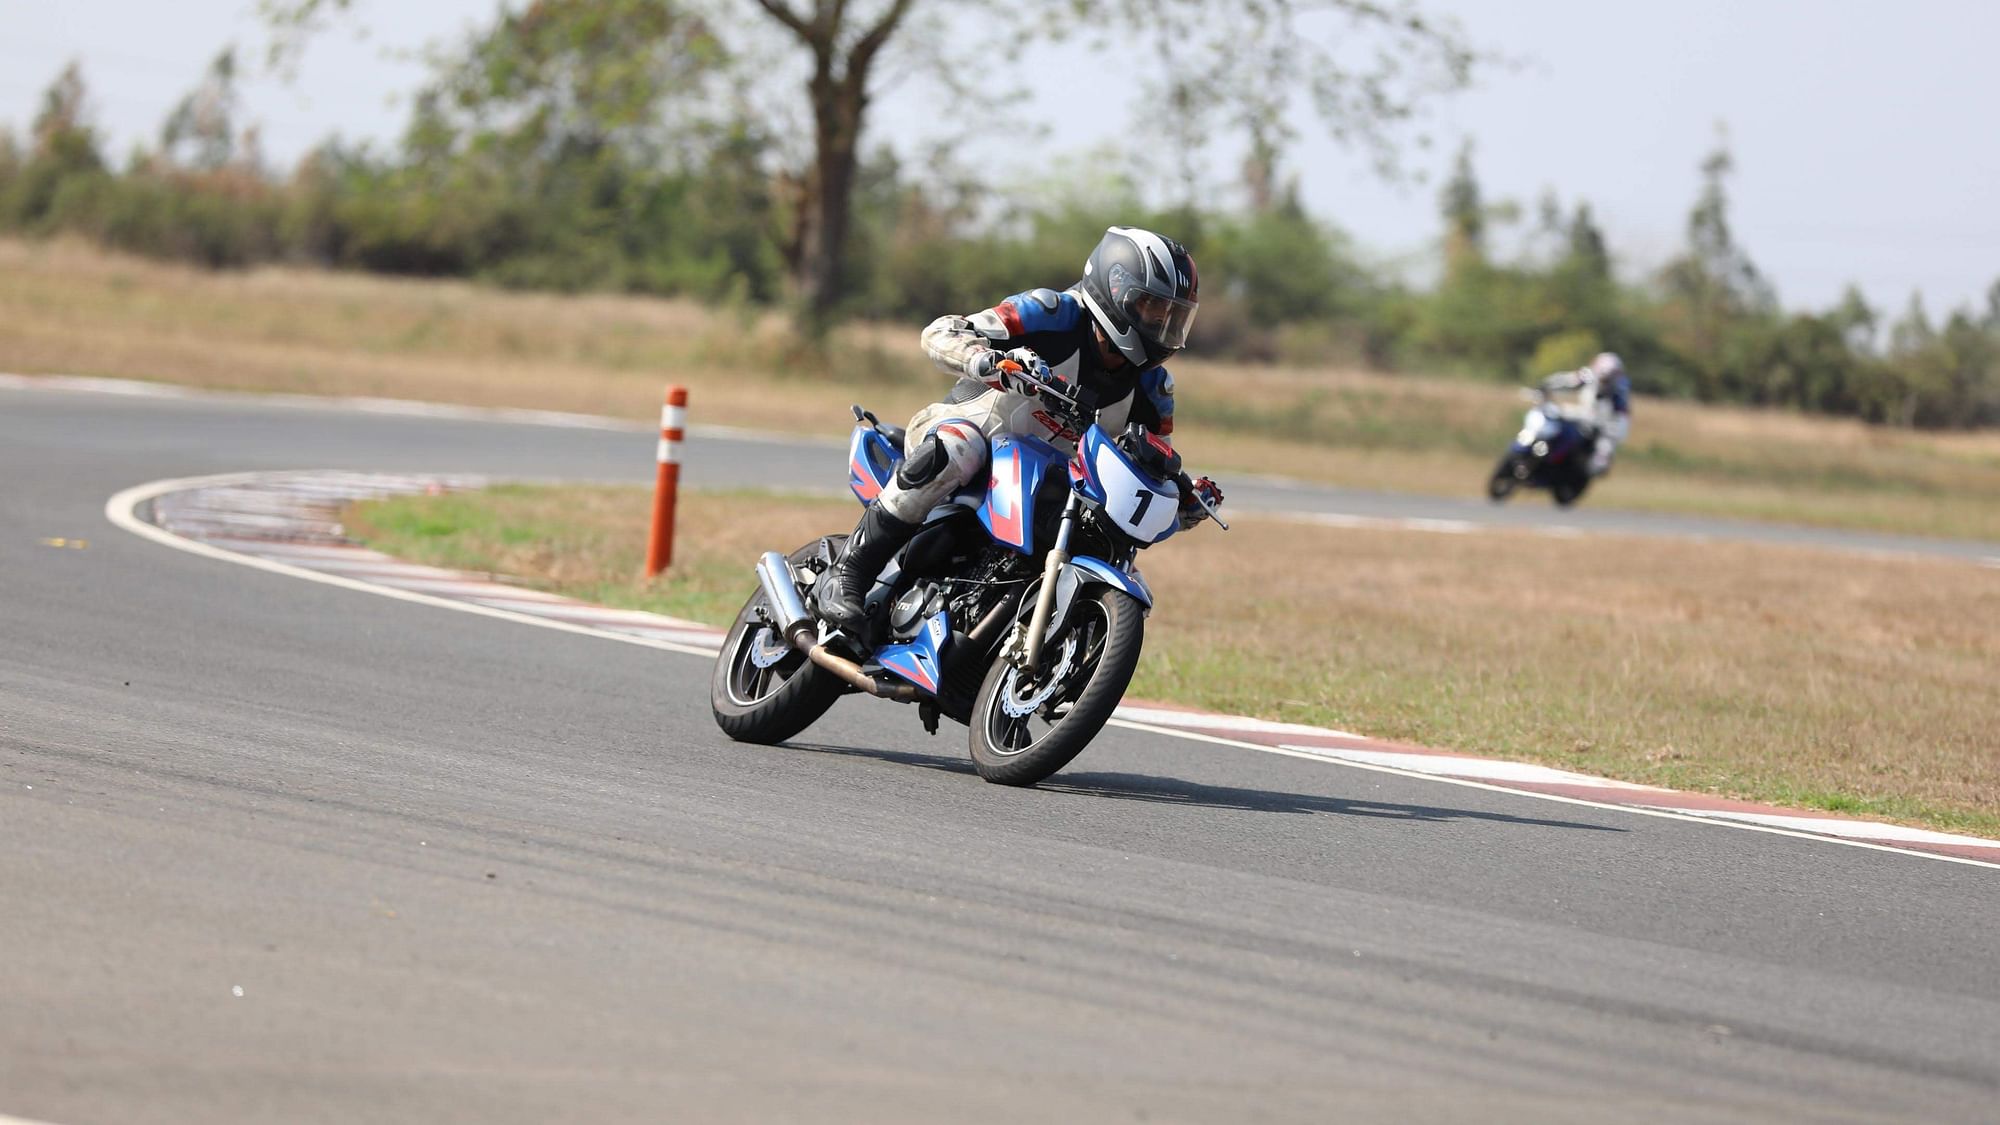 The race-spec TVS Apache RTR 200 was the primary bike for the trainees.